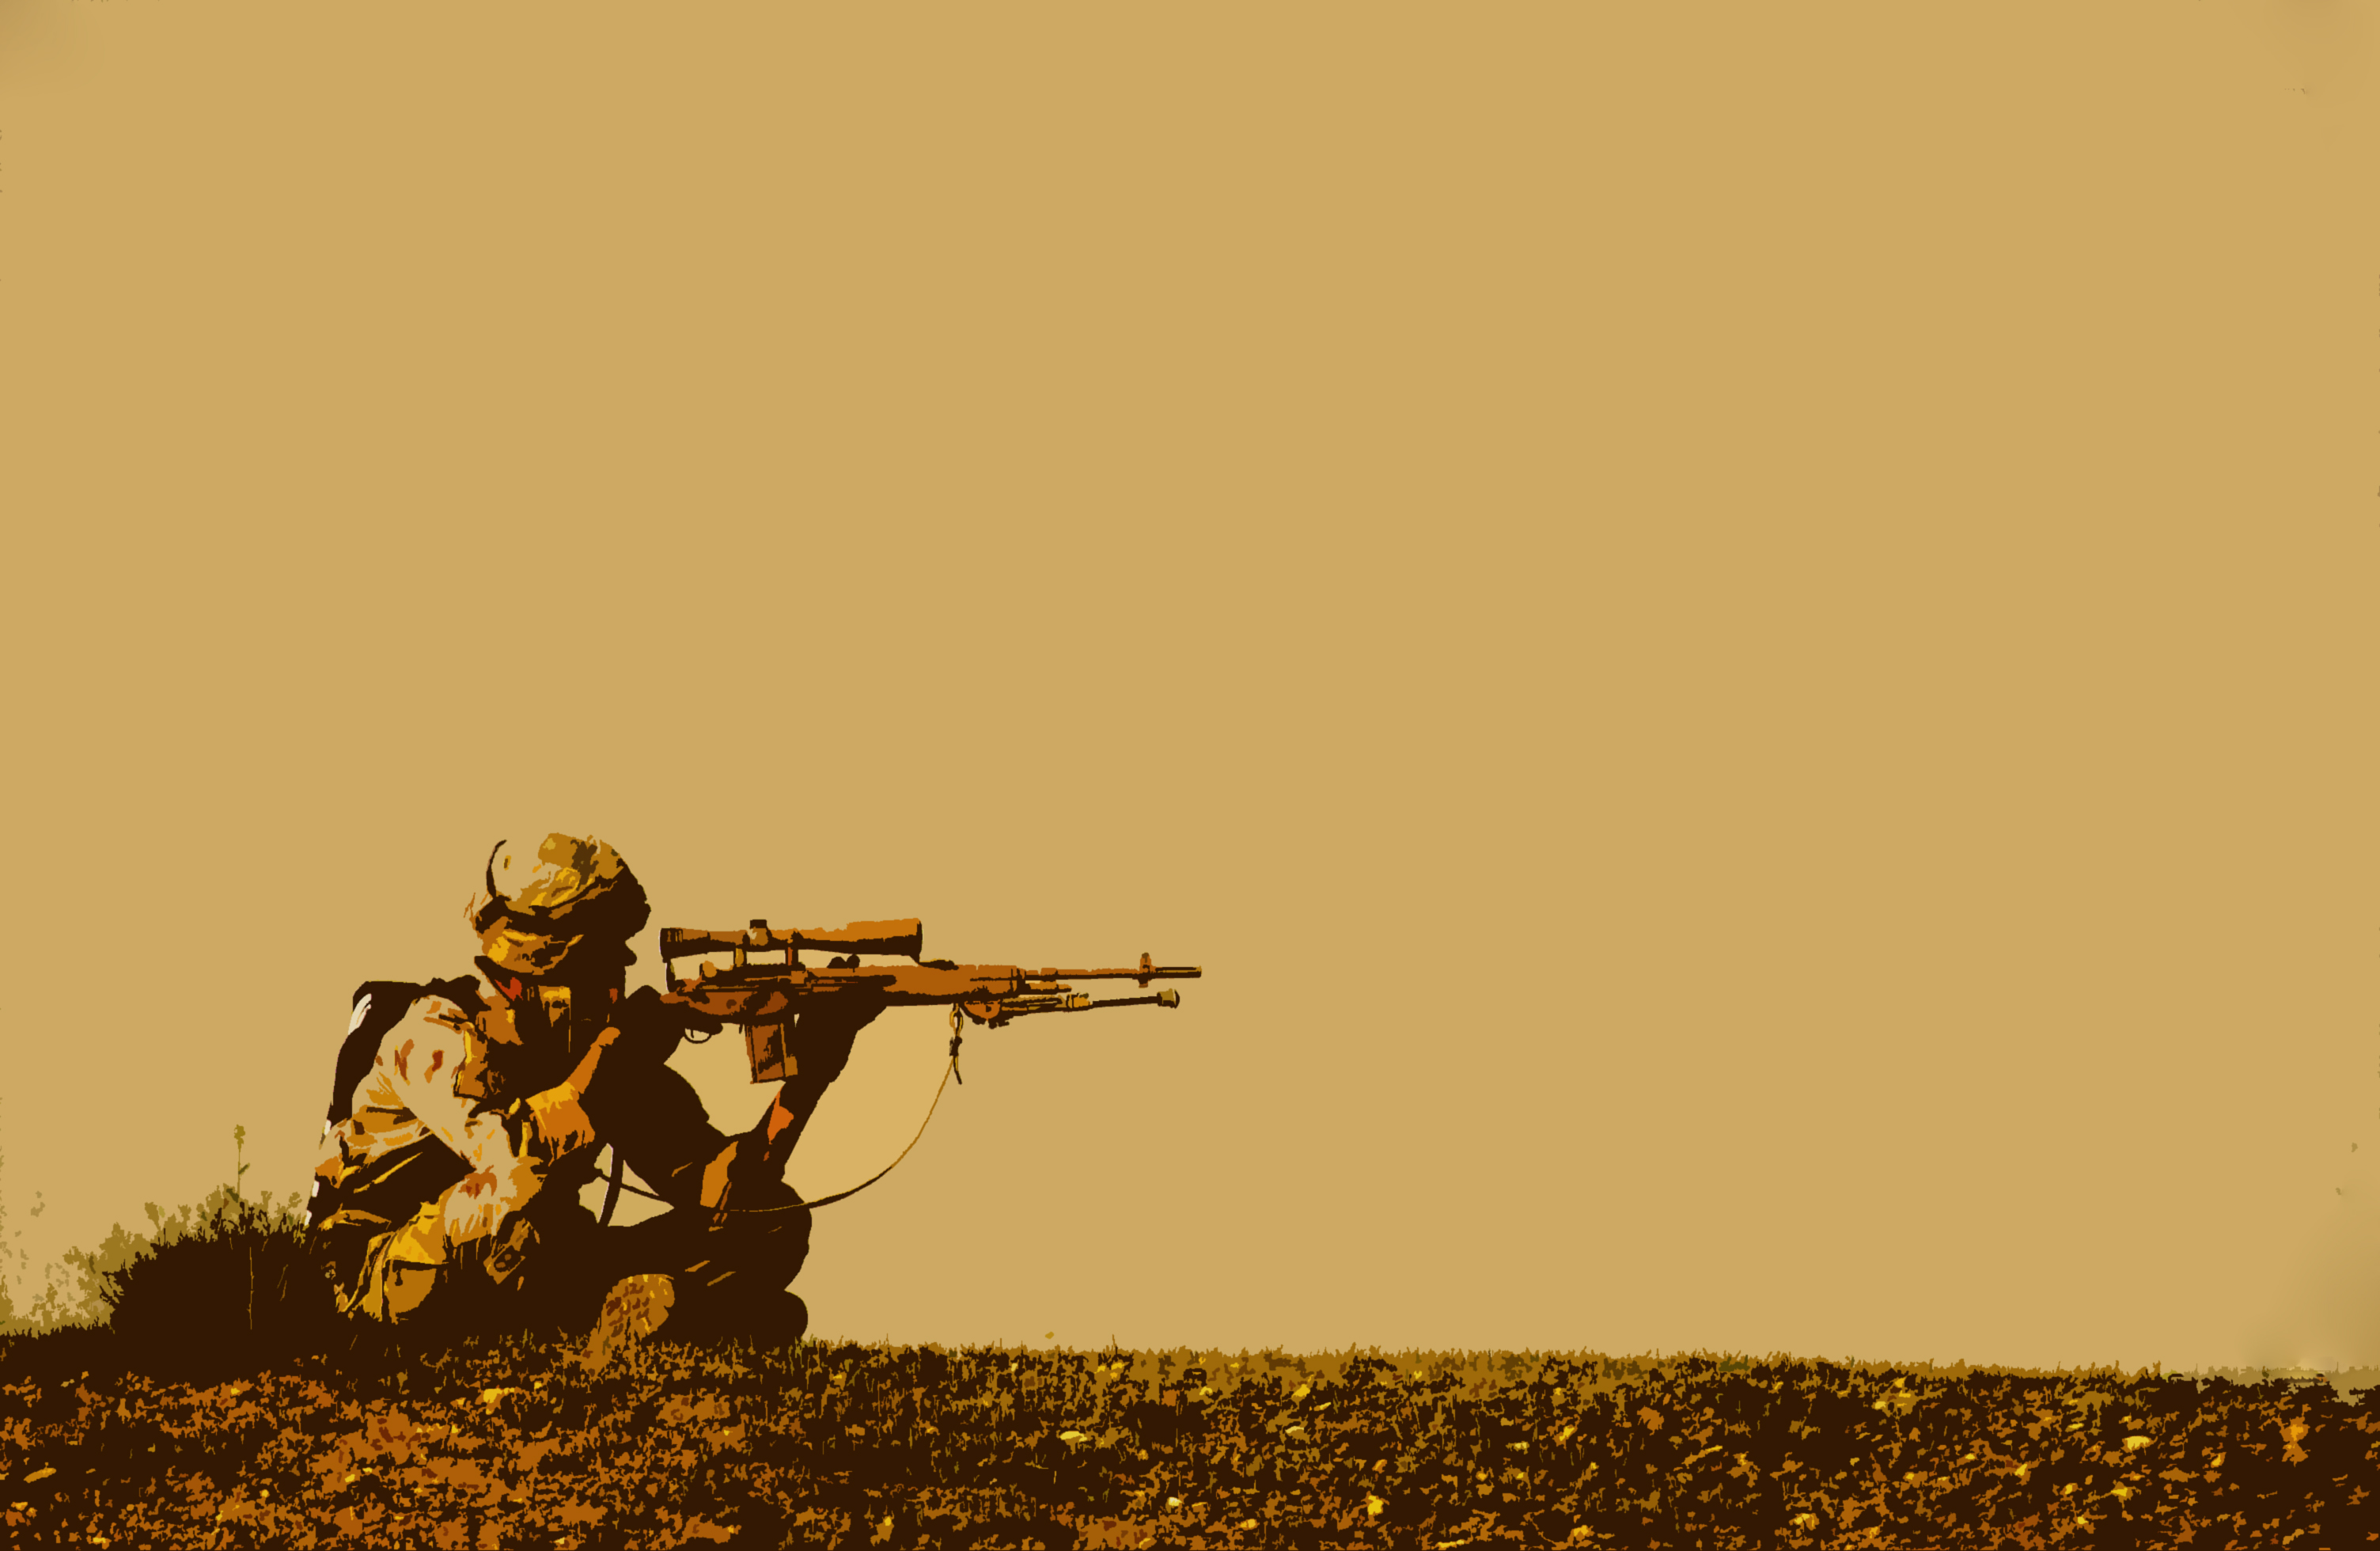 Soldiers HD Wallpapers and Backgrounds